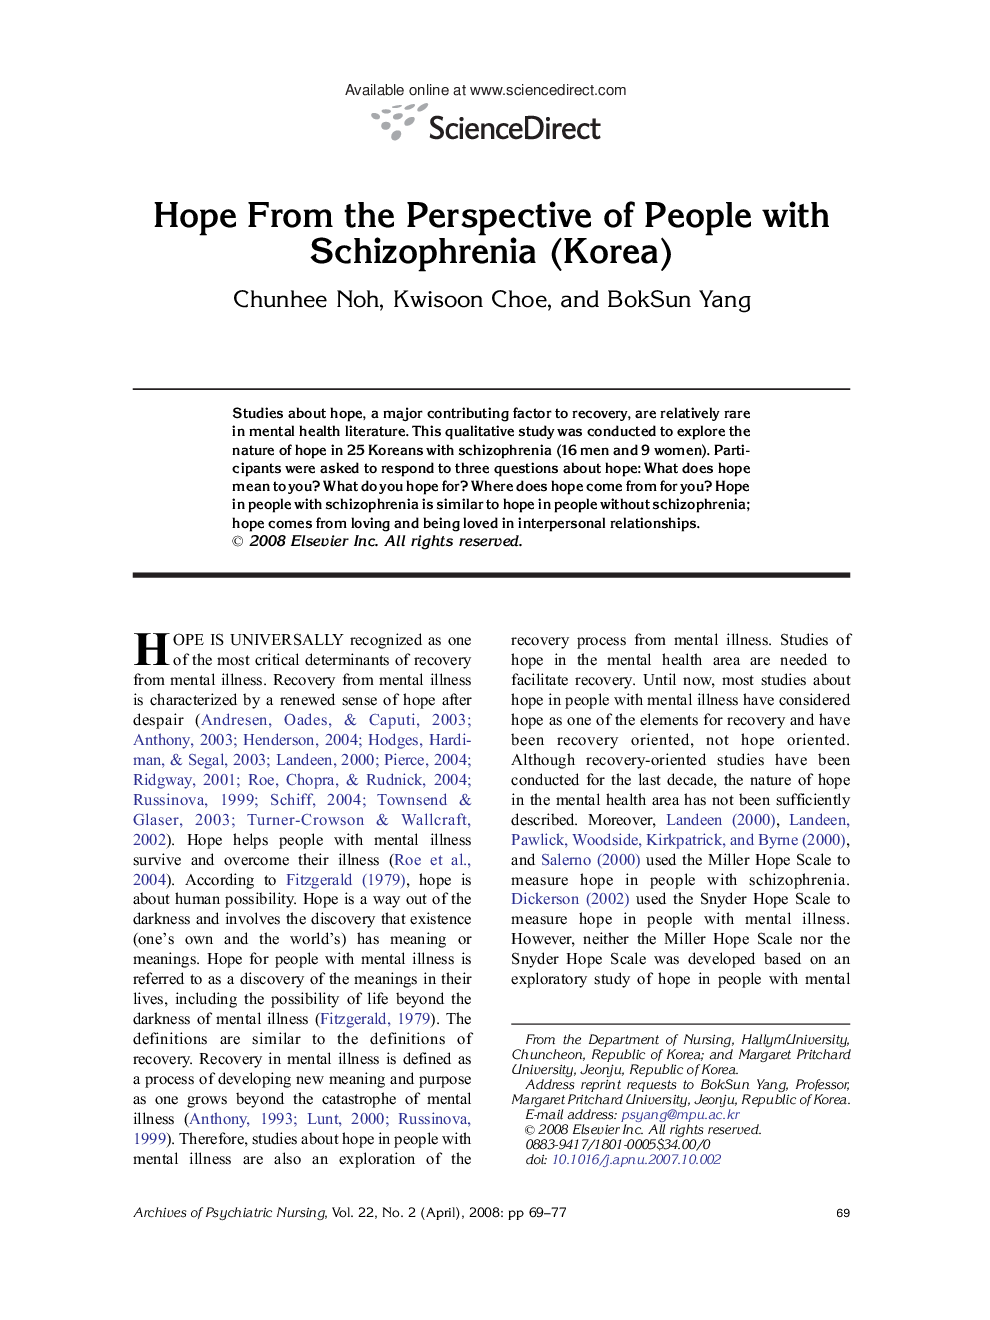 Hope From the Perspective of People with Schizophrenia (Korea)